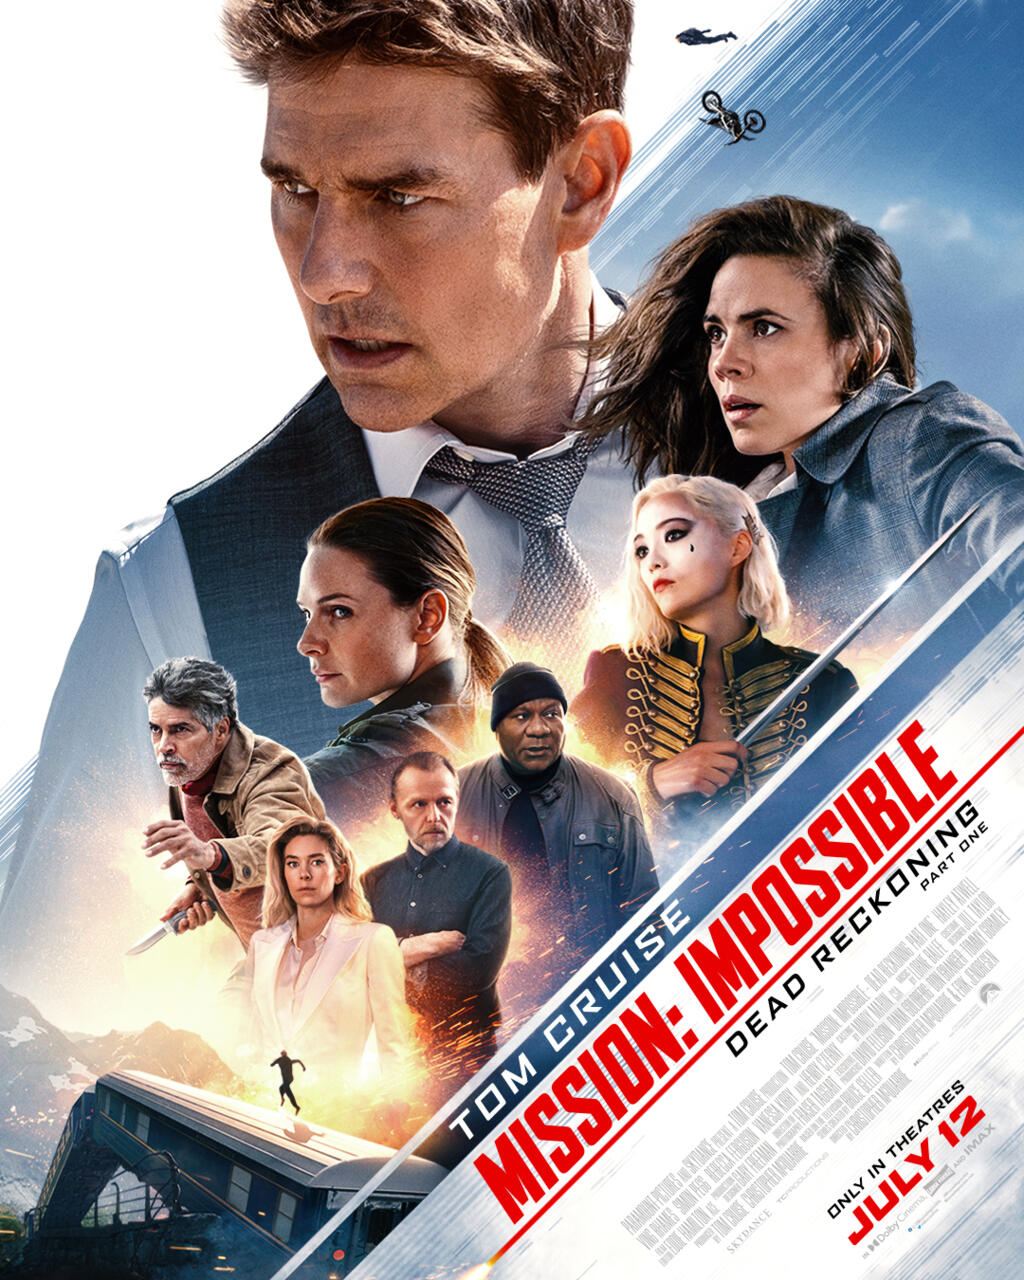 The newest poster for Mission: Impossible Dead Reckoning Part 1.